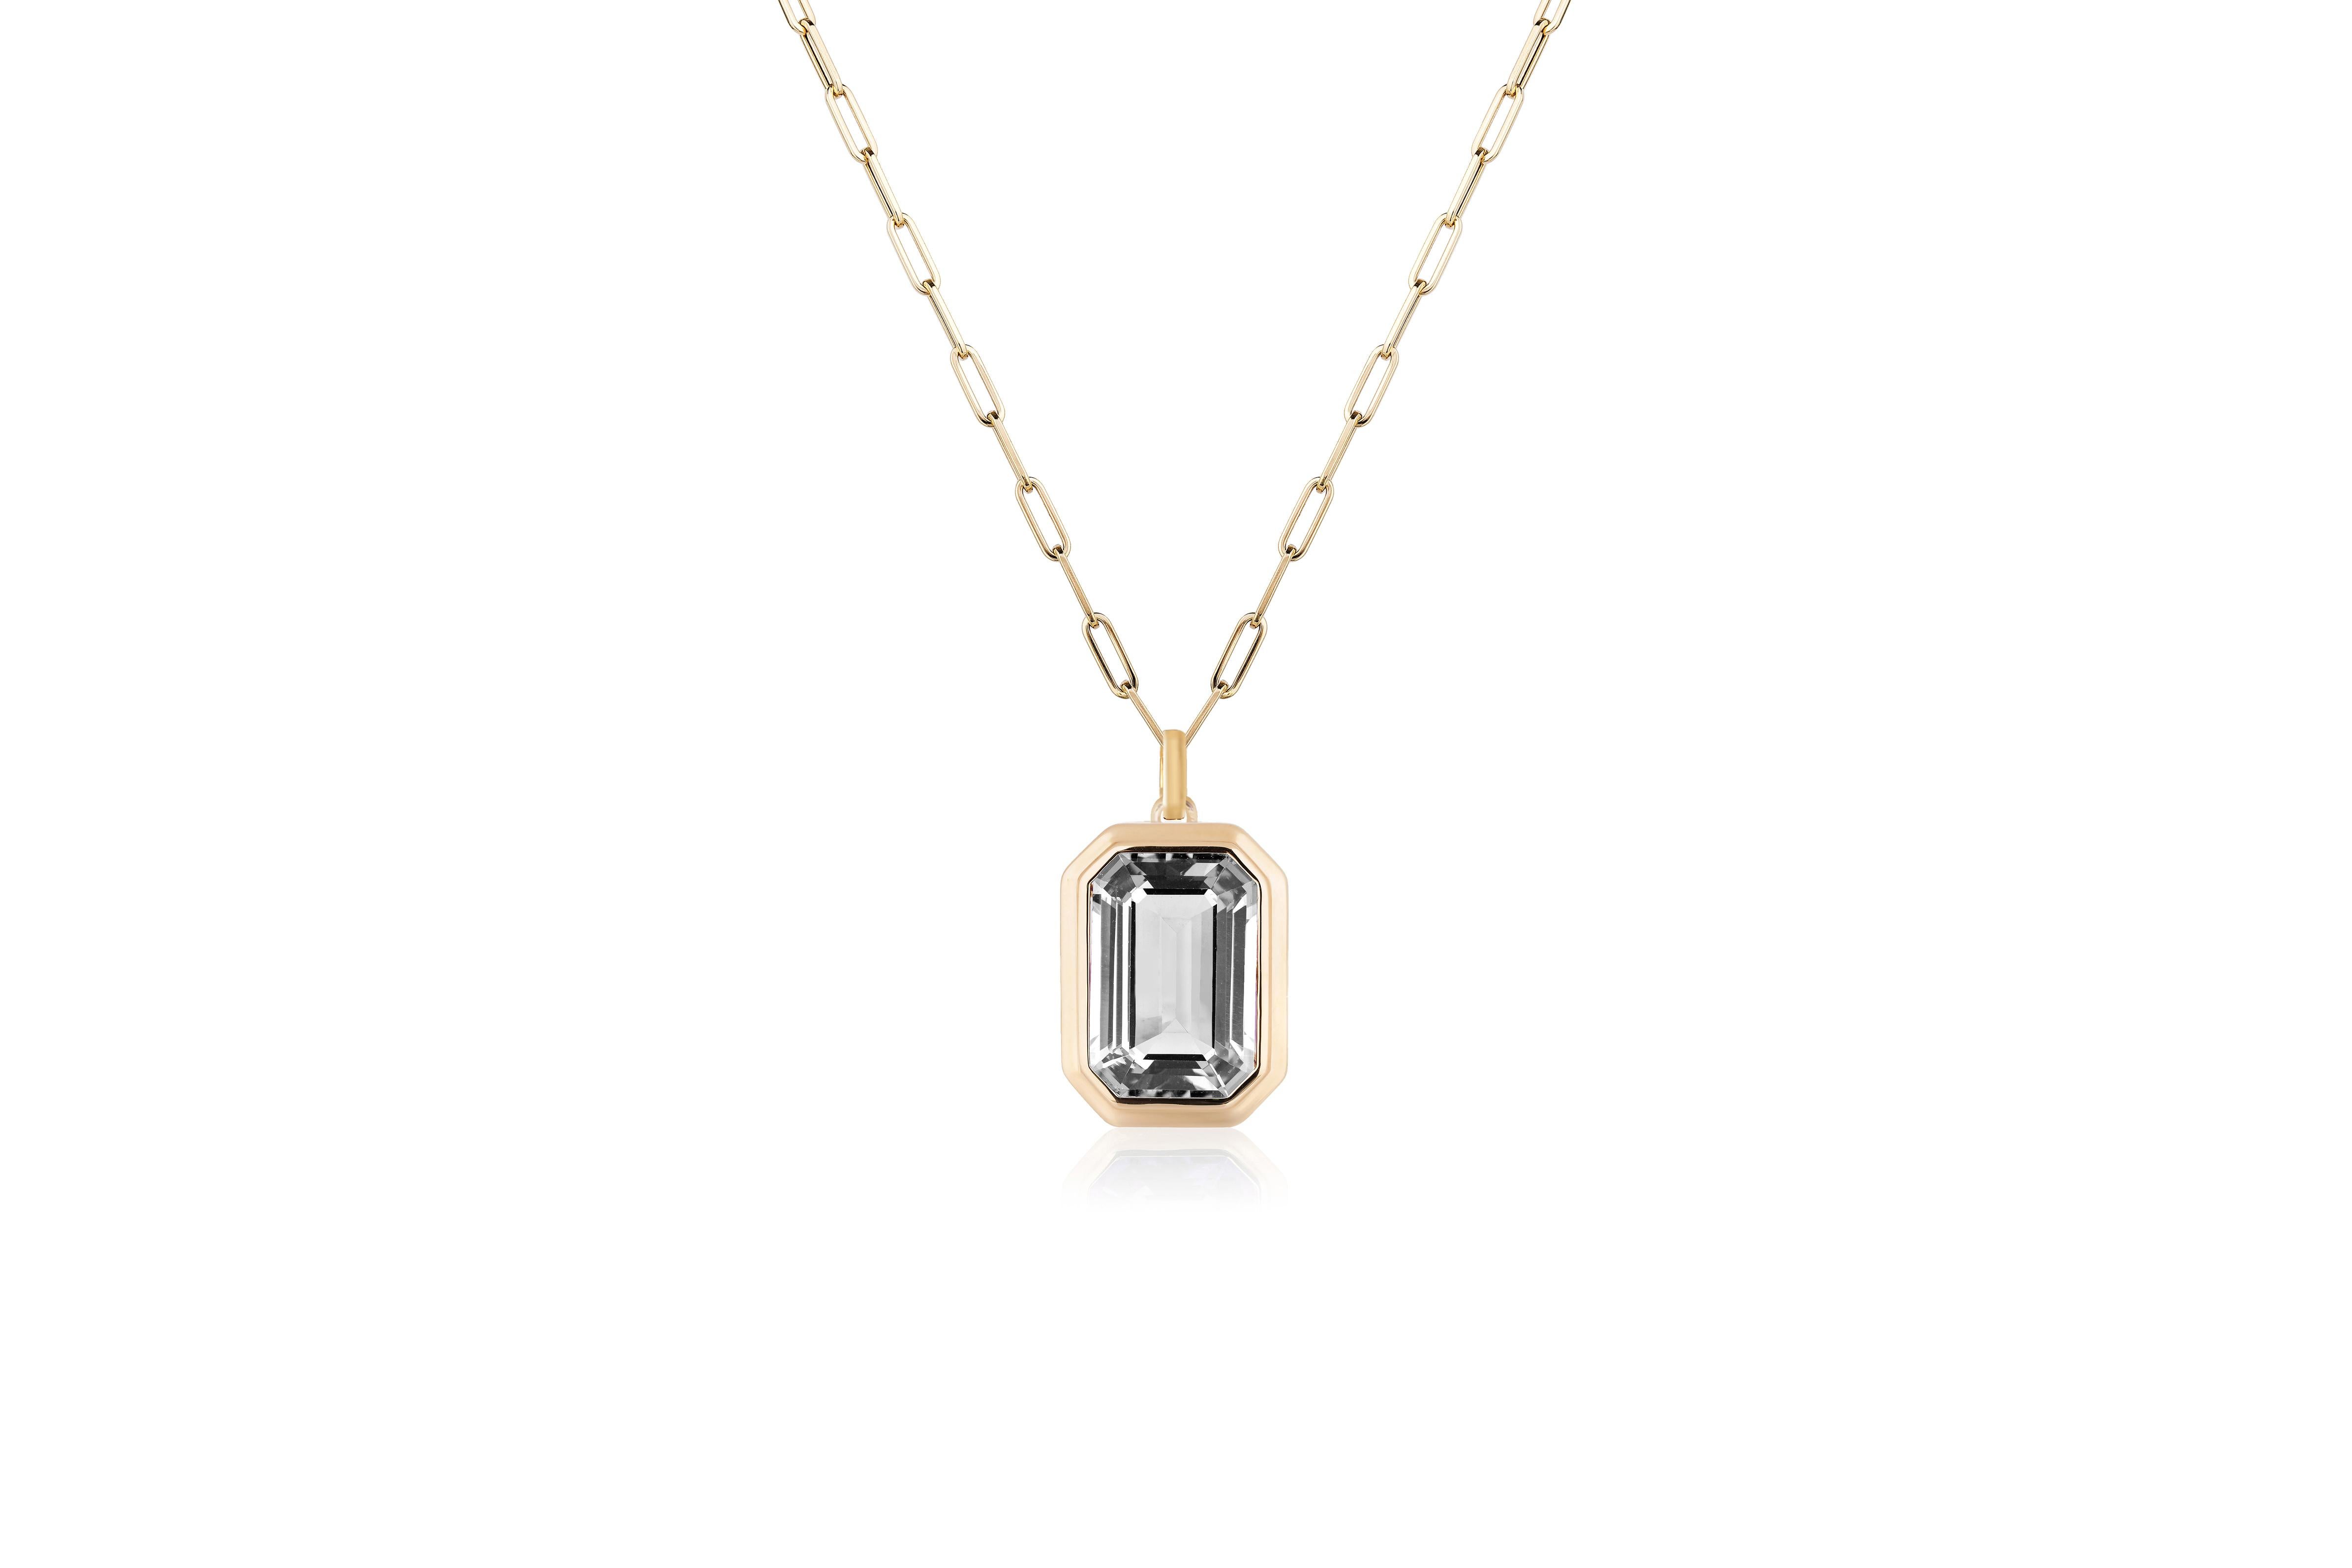 This beautiful Rock Crystal Emerald Cut Bezel Set Pendant in 18K Yellow Gold is from our ‘Manhattan’ Collection. Minimalist lines yet bold structures are what our Manhattan Collection is all about. Our pieces represent the famous skyline and